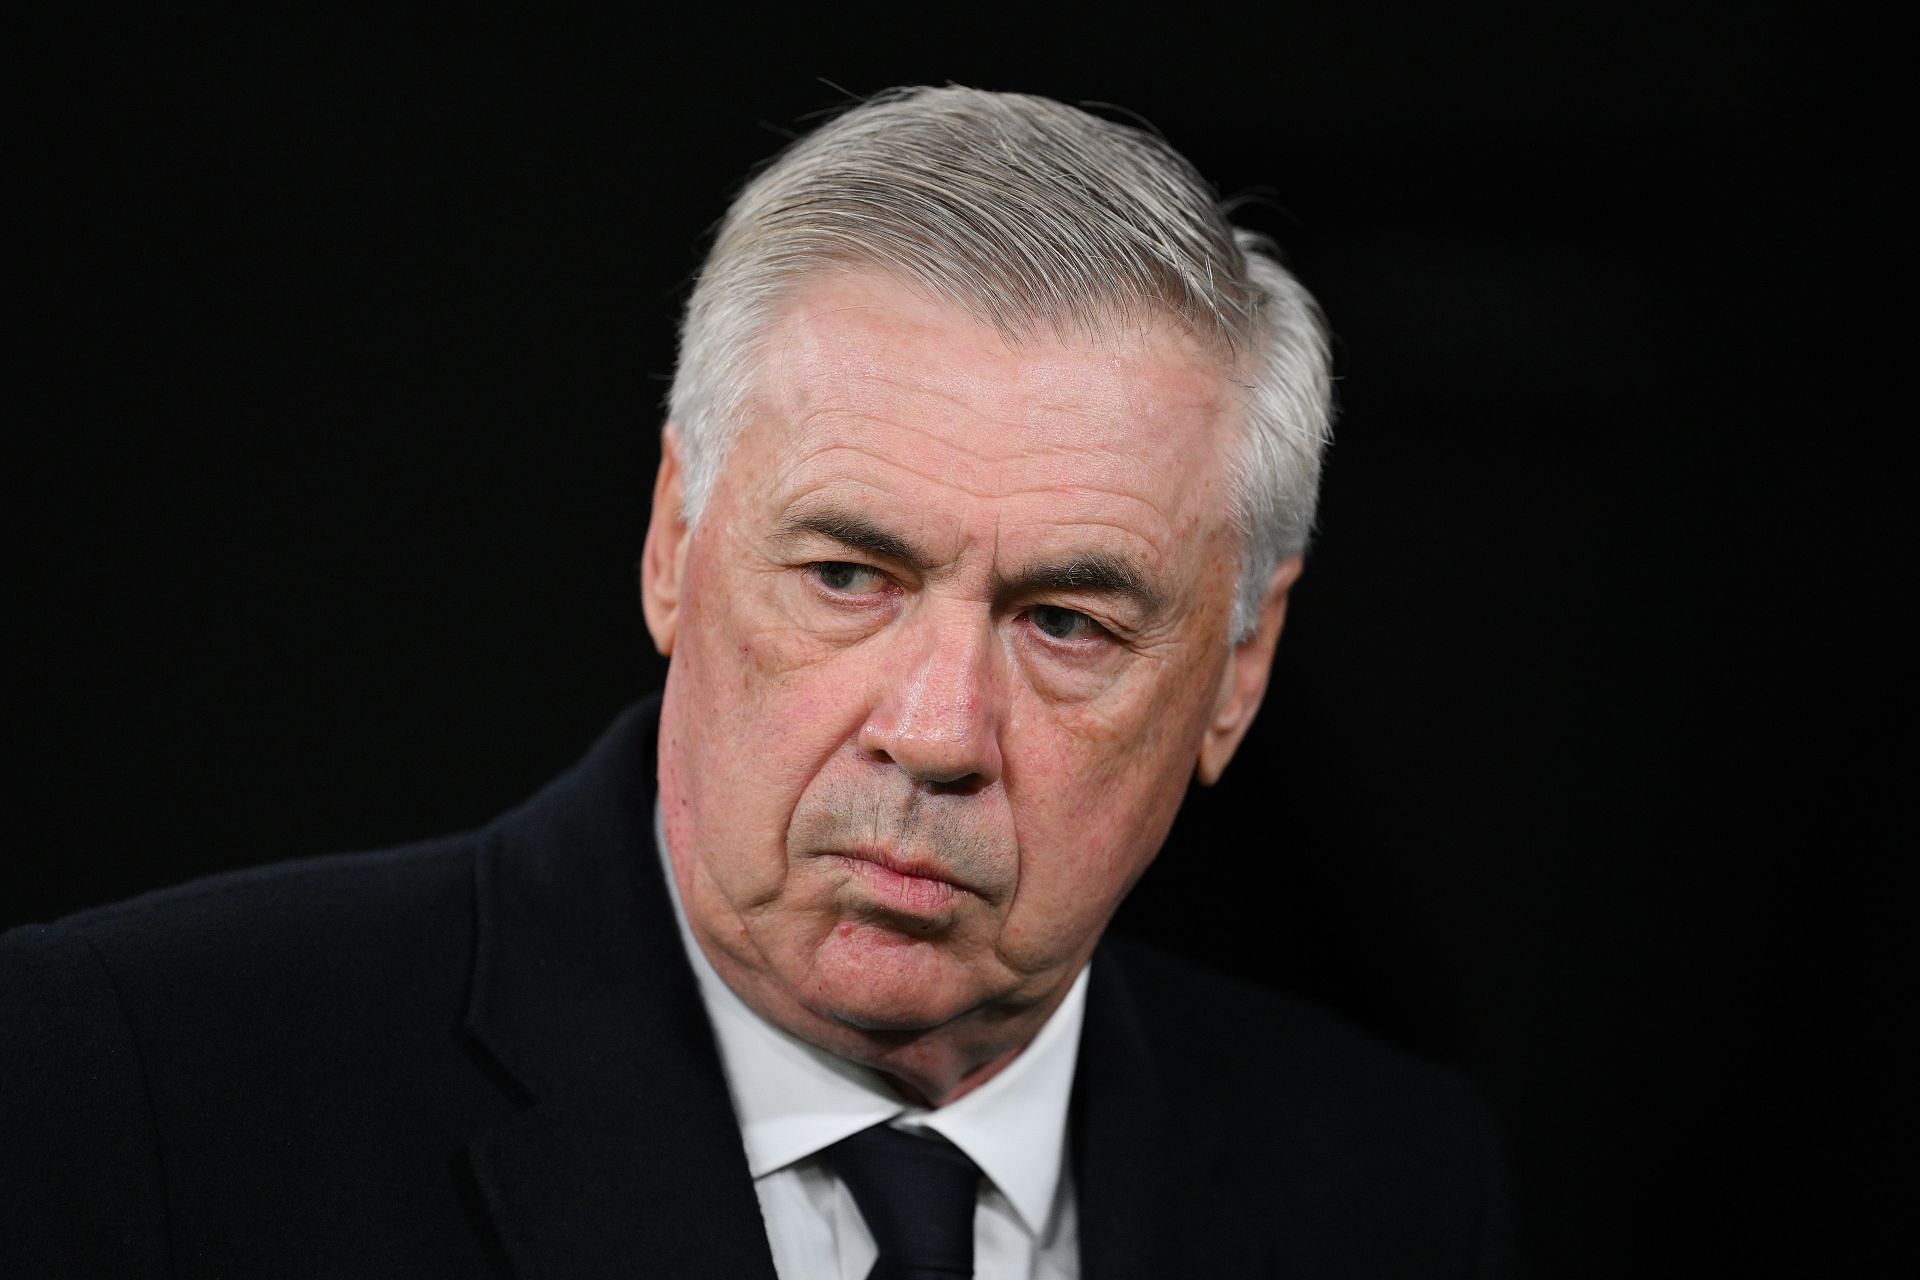 “We won the Champions League thanks to his goals” Carlo Ancelotti